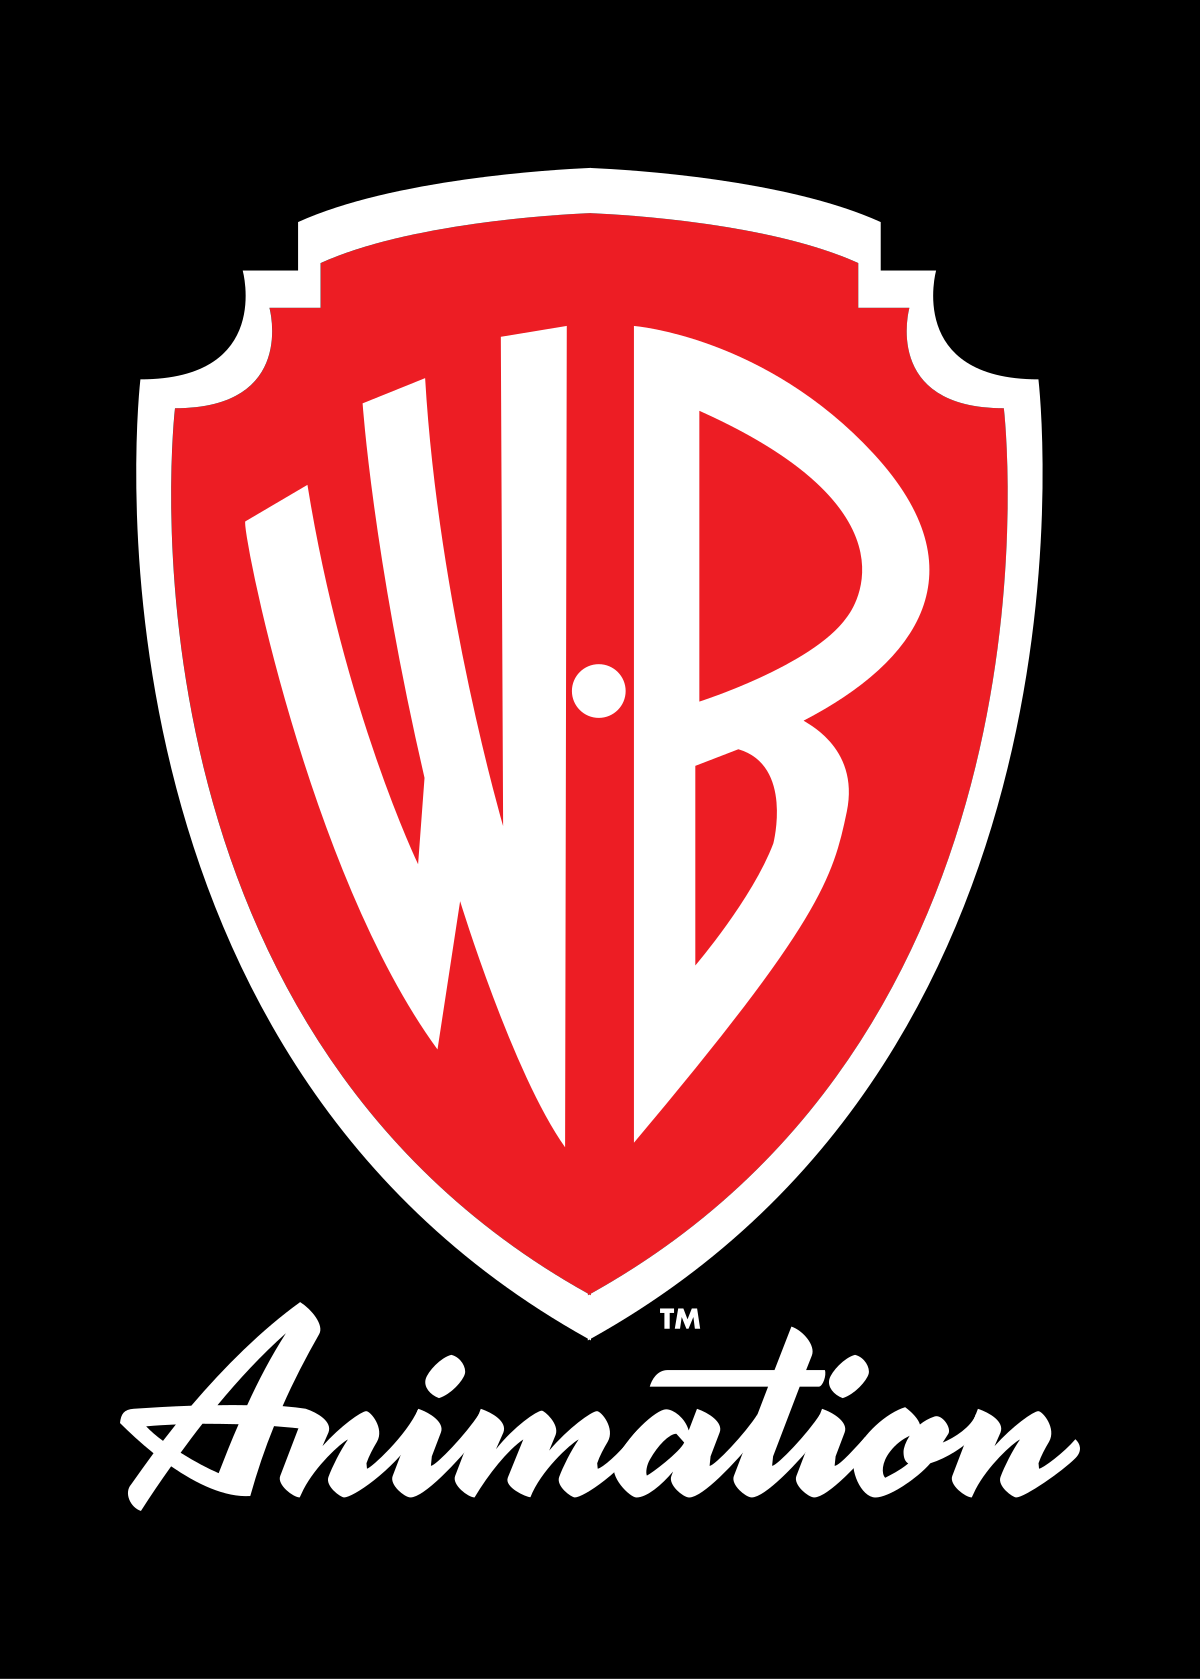 File:Warner Bros. Animation color  - Wikimedia Commons